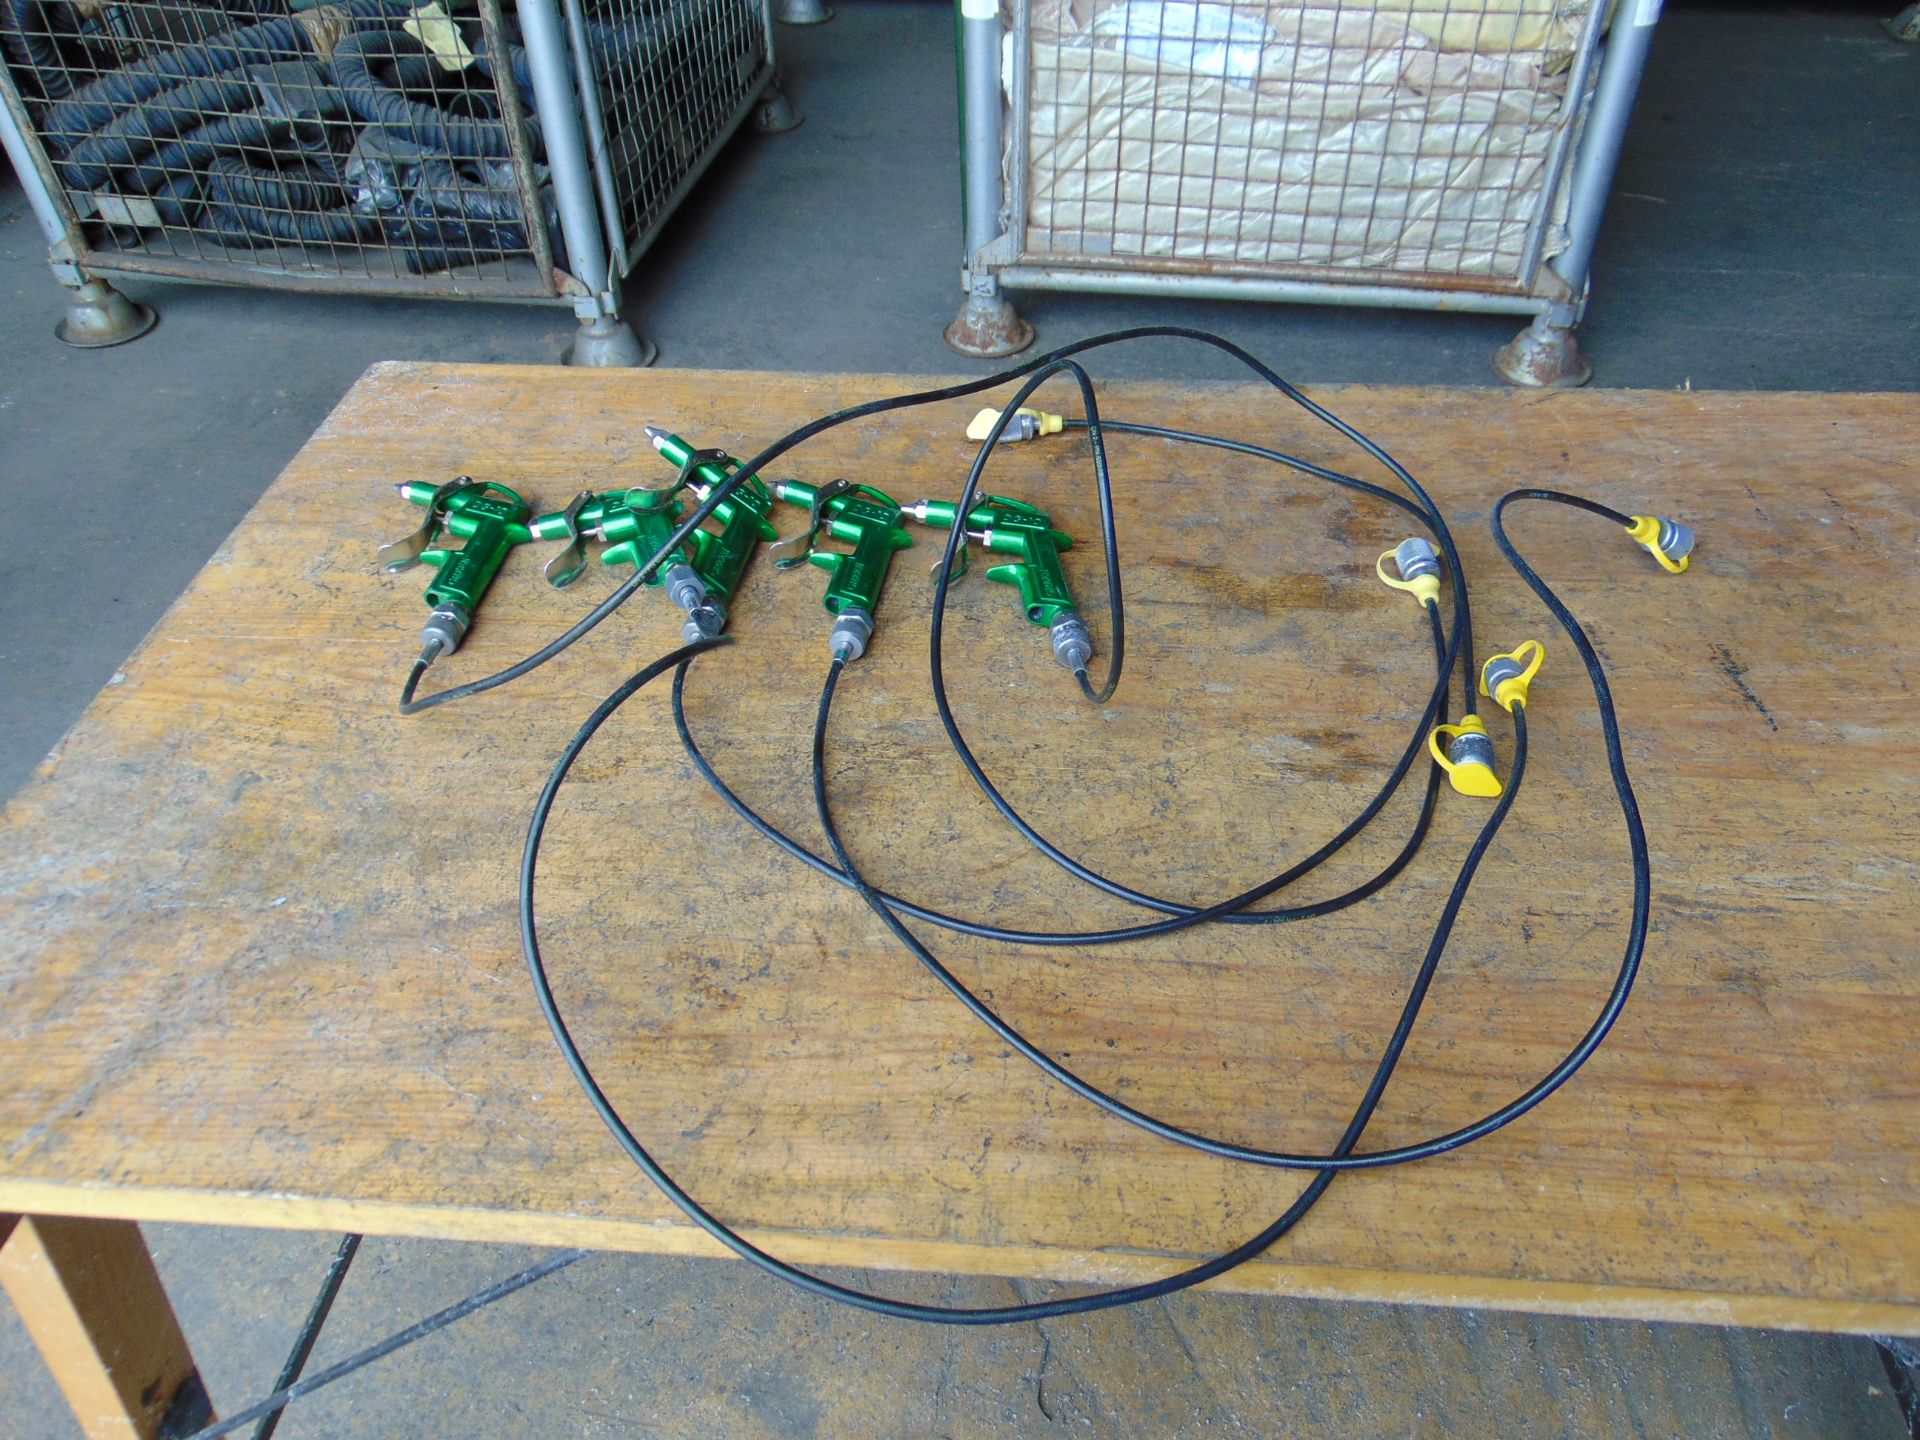 5 x Green DG-10 Air Dusters - Image 2 of 6